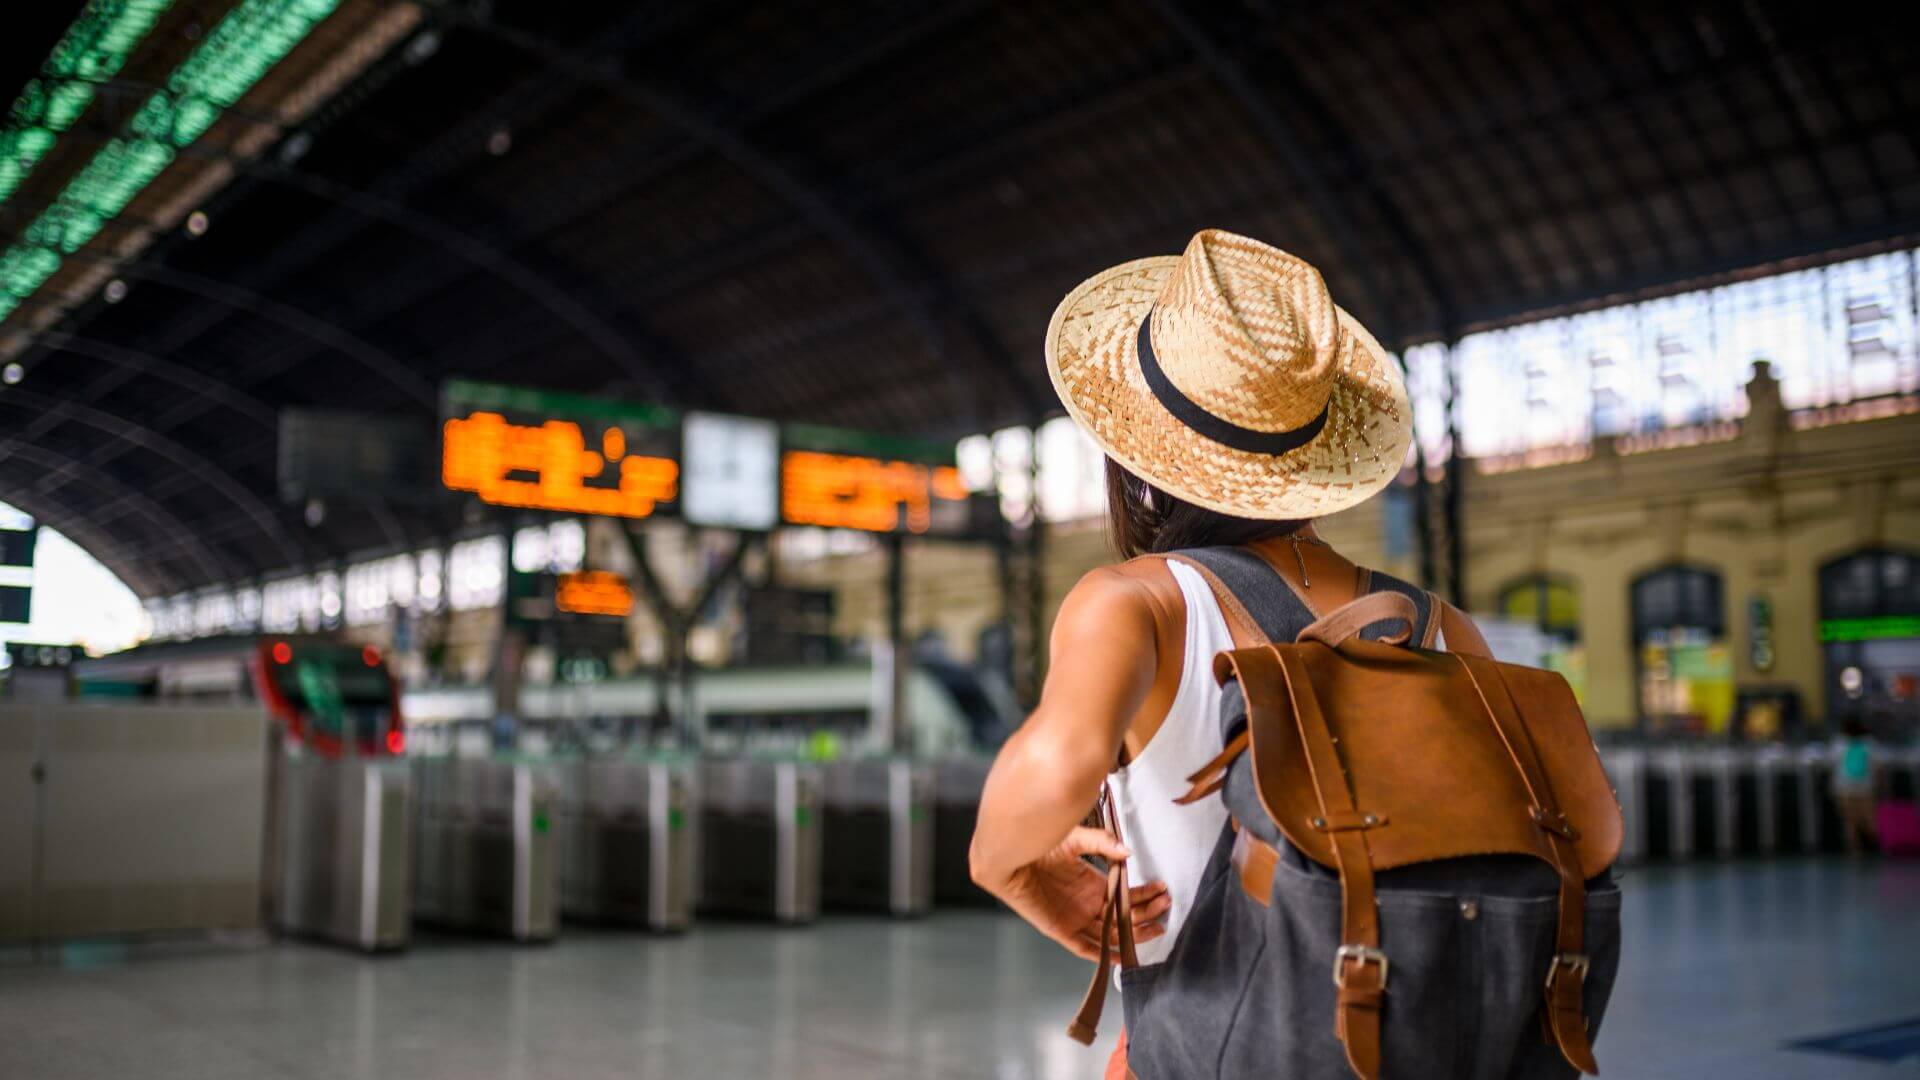 5 Essential Safety Tips You Should Know if You Are Traveling Alone